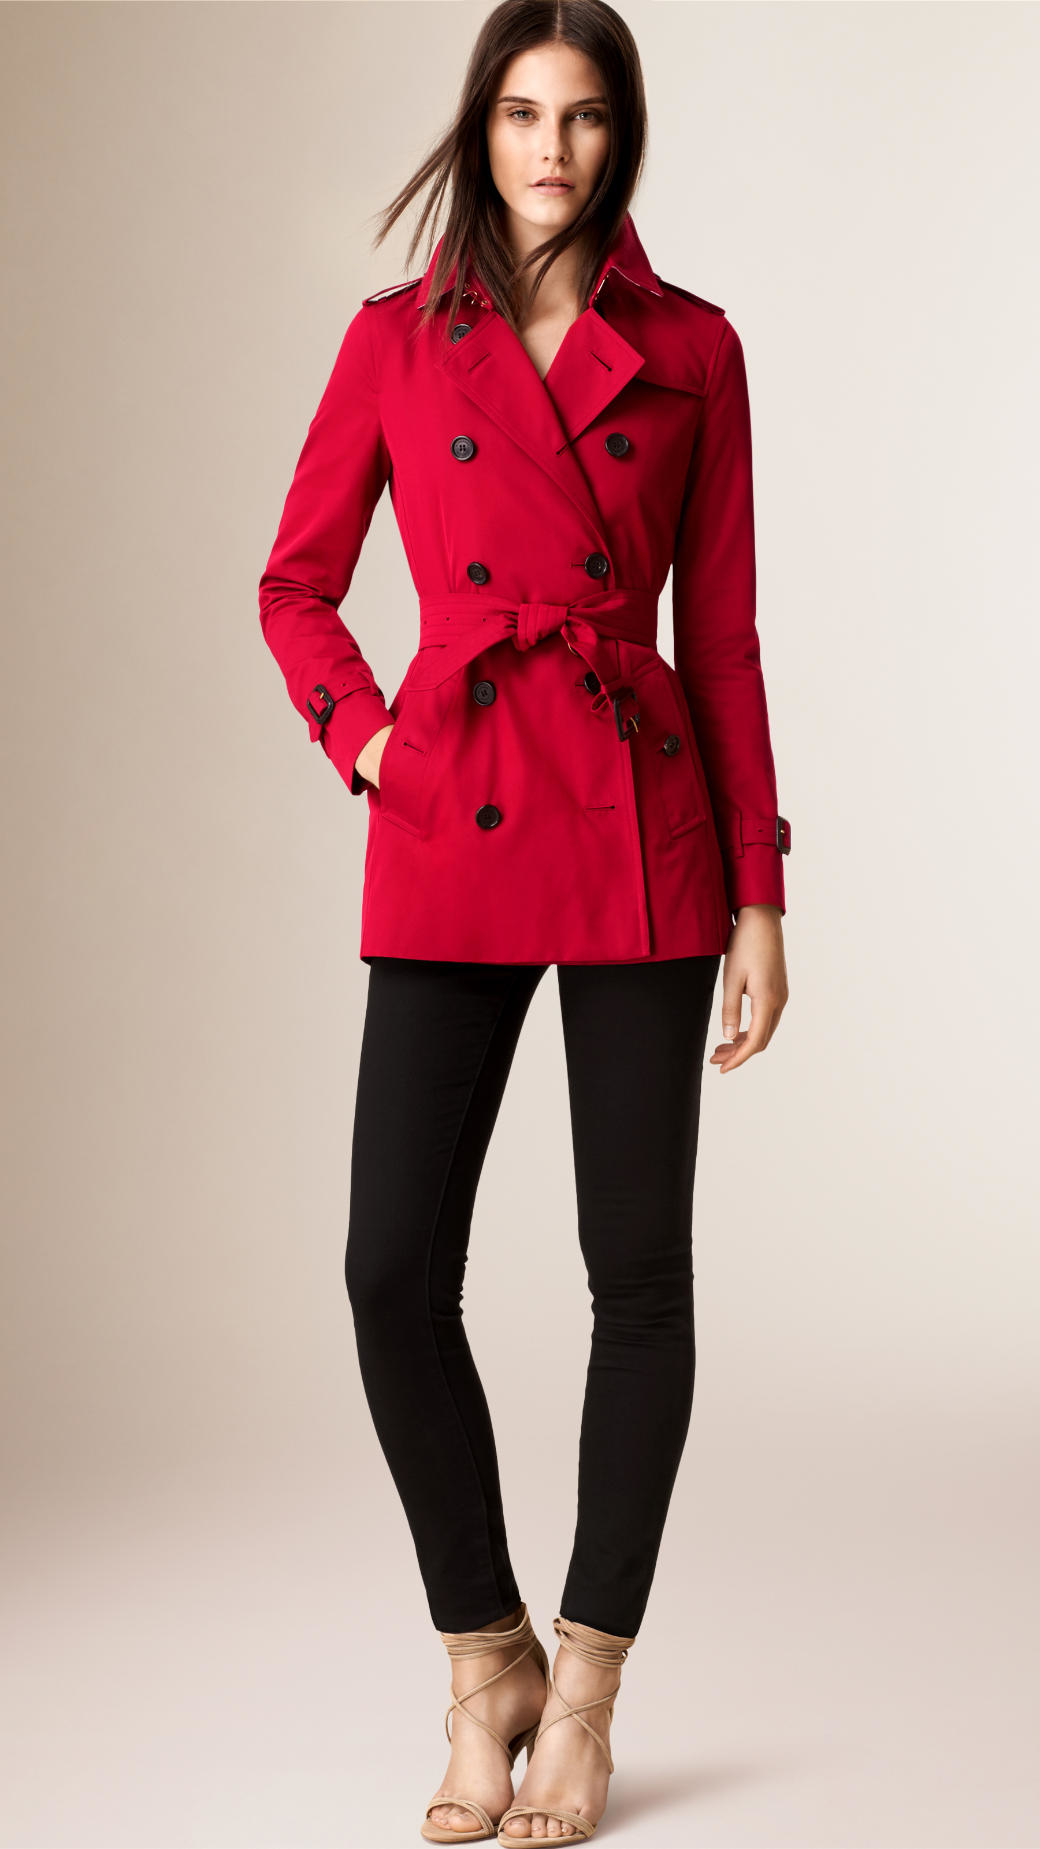 Burberry The Kensington - Short Heritage Trench Coat in Red - Lyst